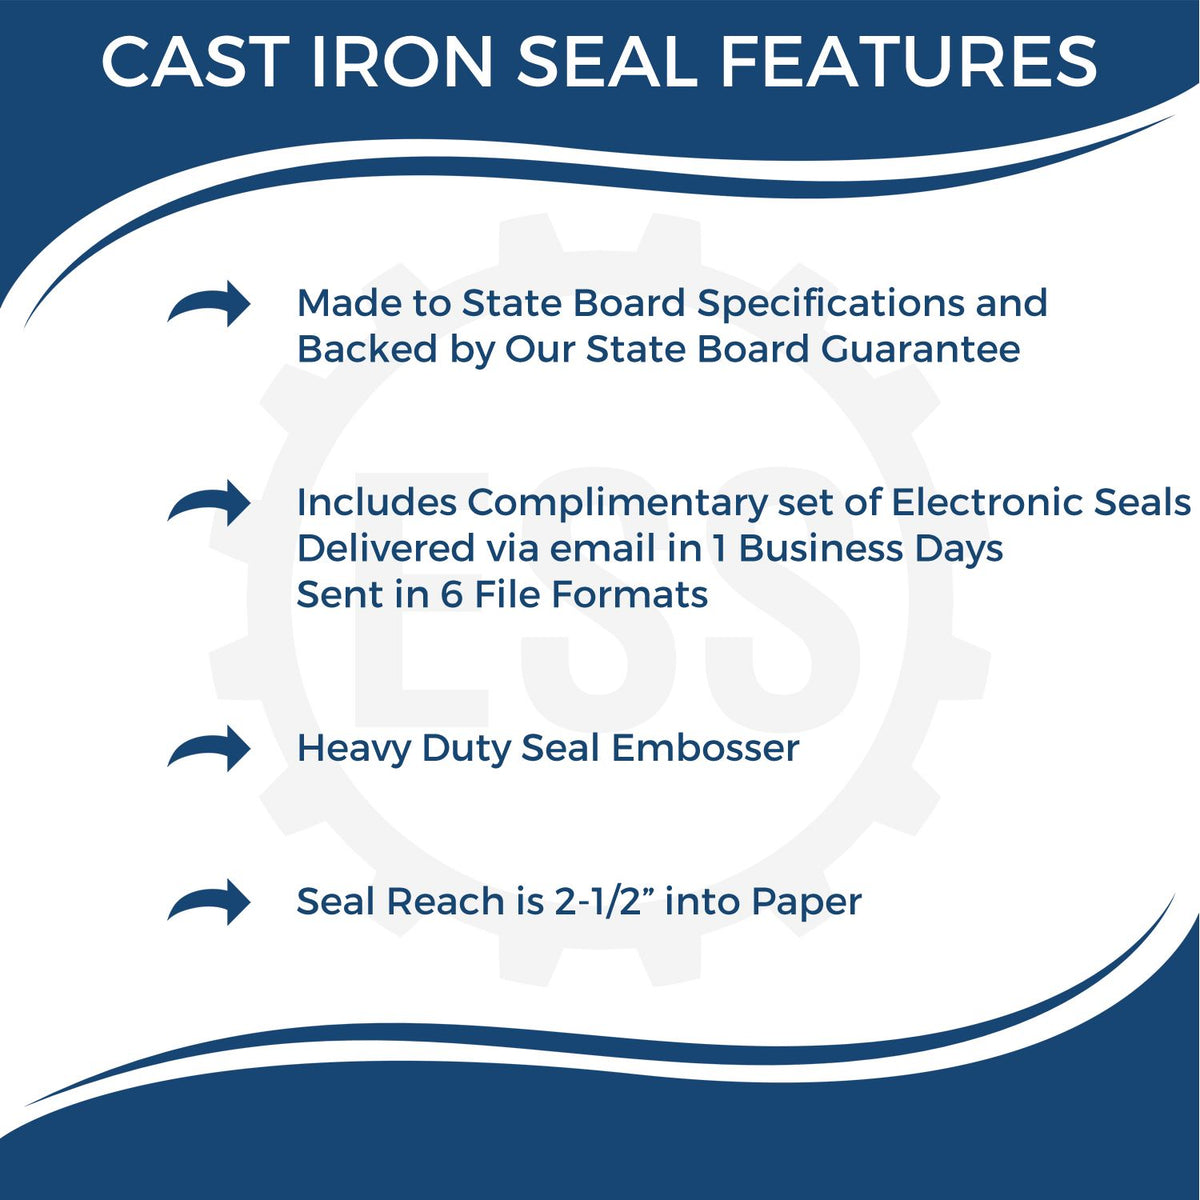 A picture of an infographic highlighting the selling points for the Heavy Duty Cast Iron Delaware Land Surveyor Seal Embosser